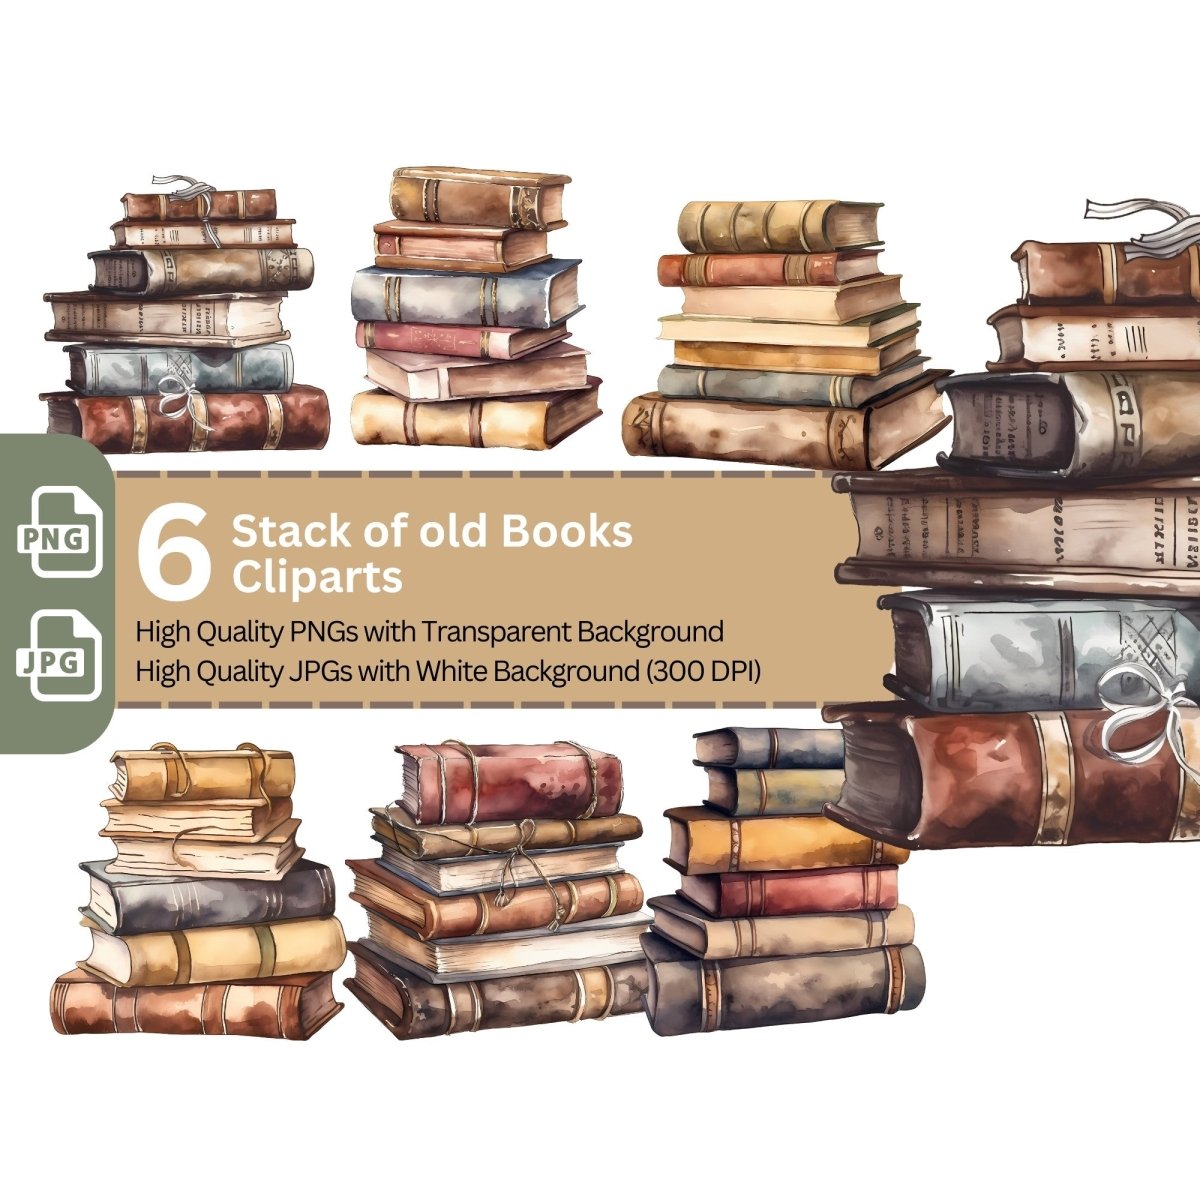 Stack of old Books Clipart 6+6 High Quality PNGs Bundle - Everything Pixel